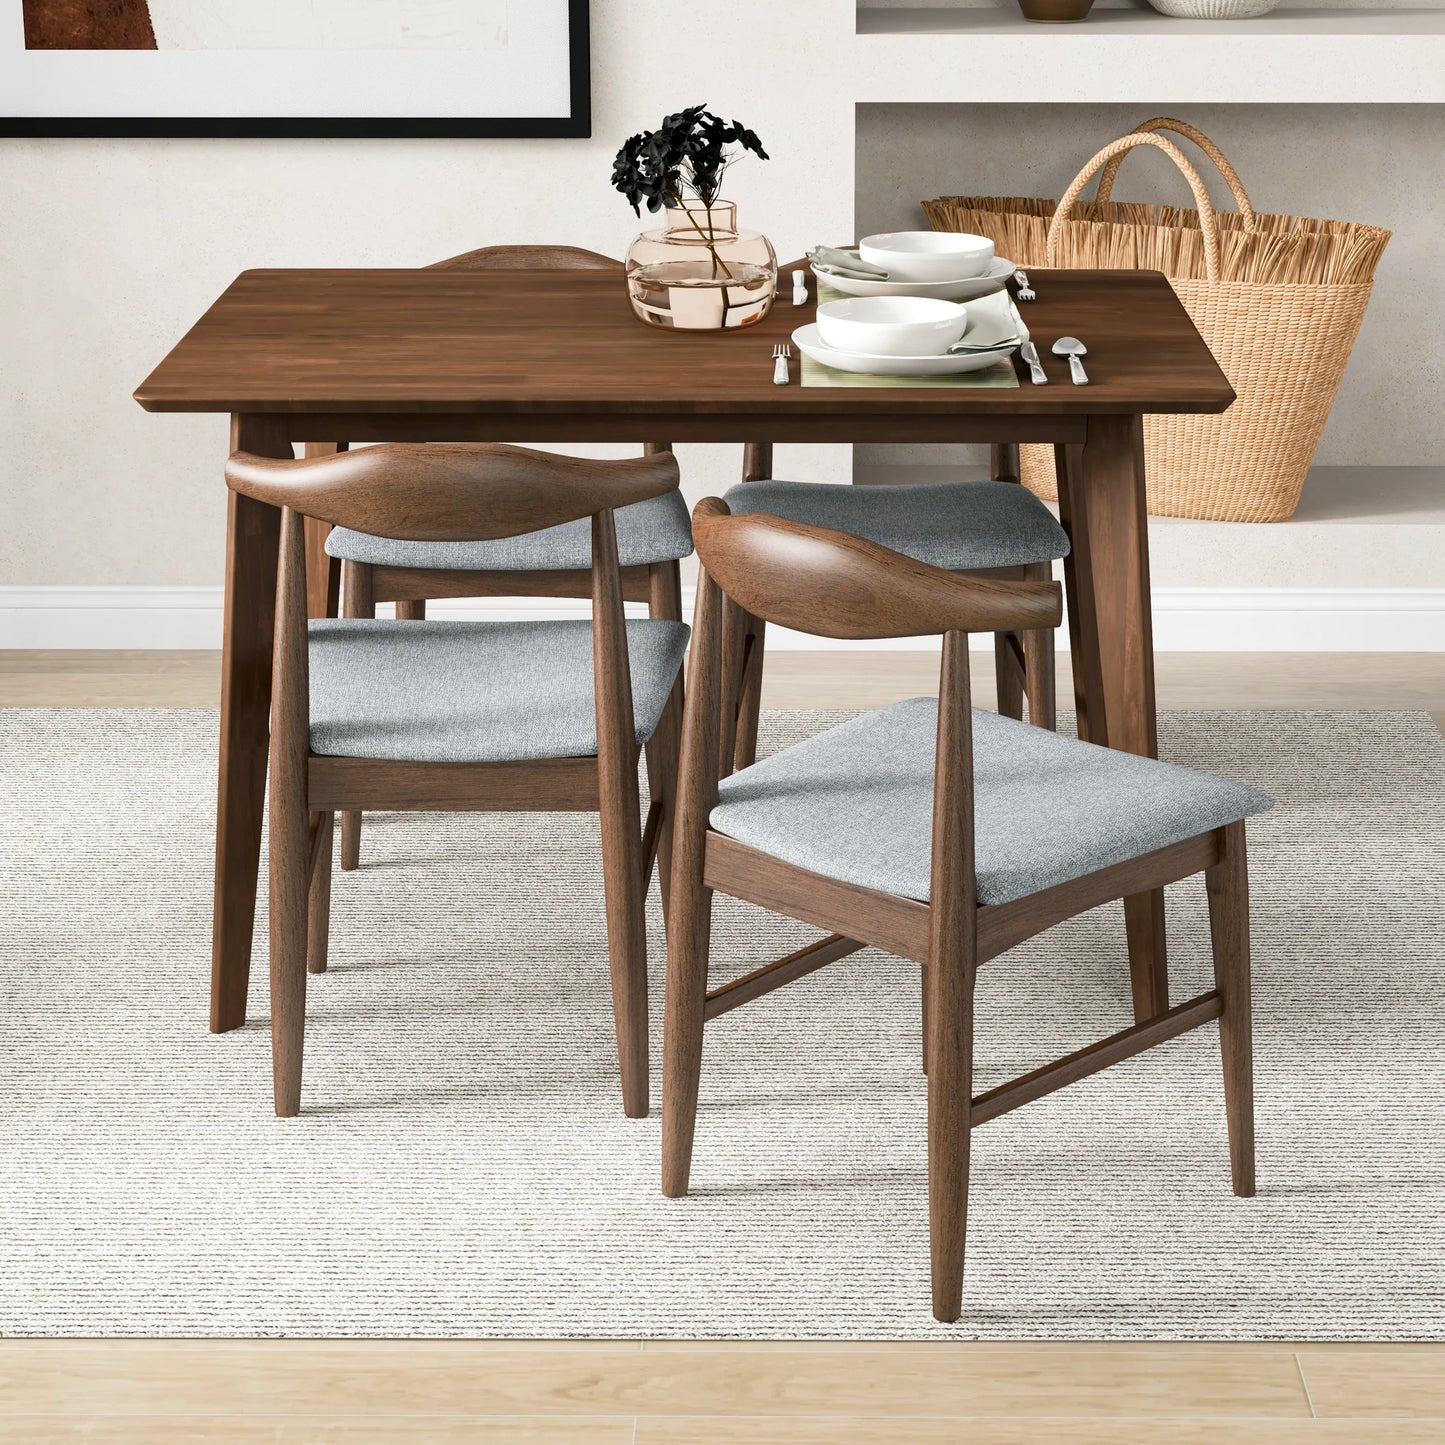 Dining Set, Abbott Small Table (Walnut) with 4 Winston Gray Fabric Chairs